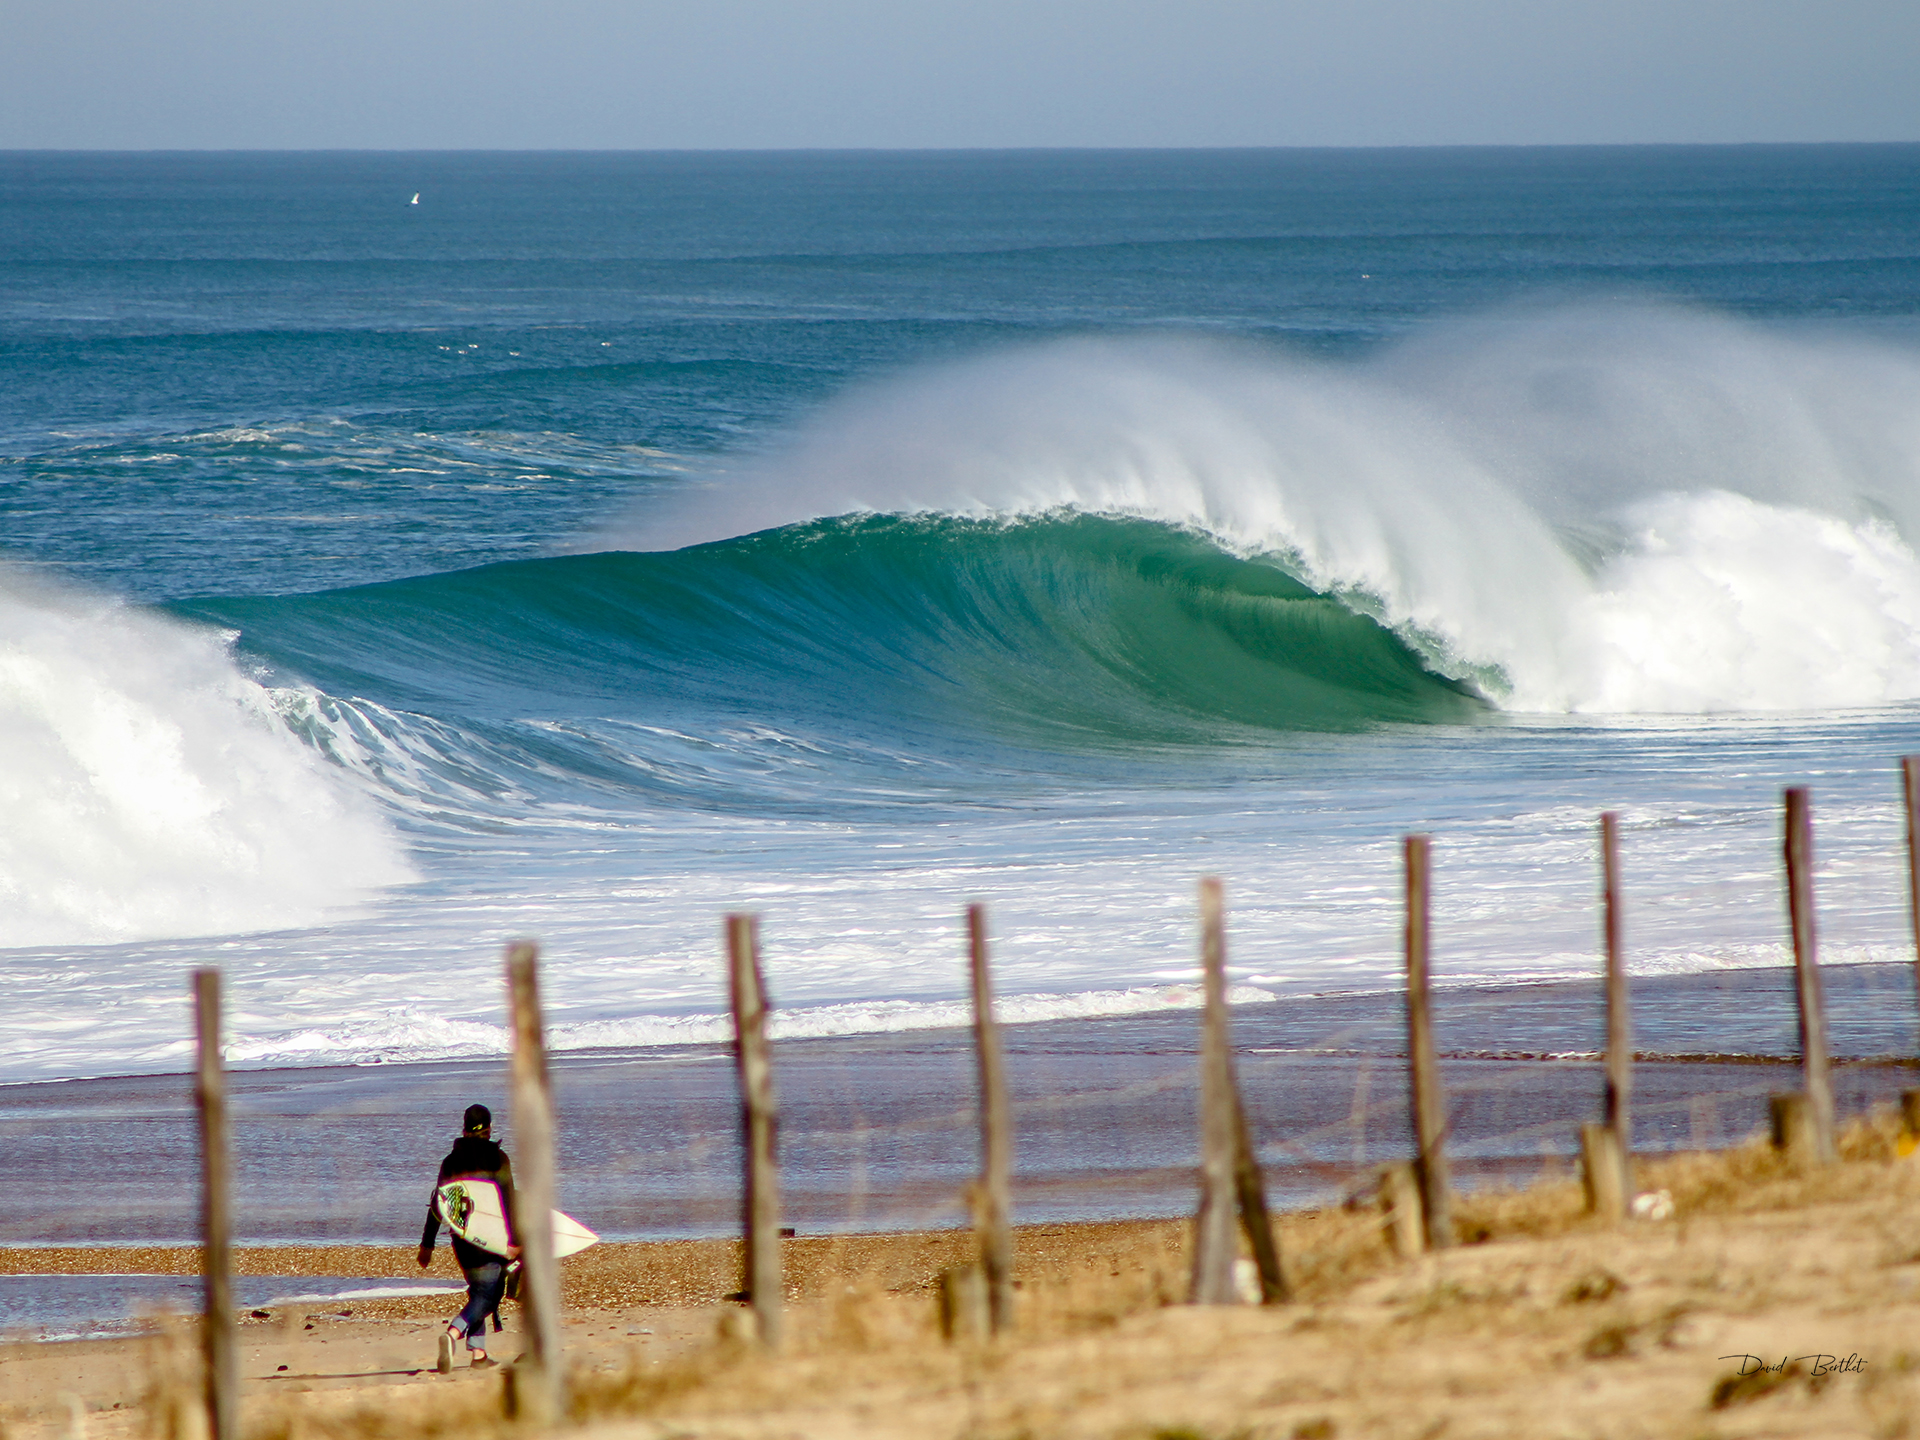 Hossegor - The Search